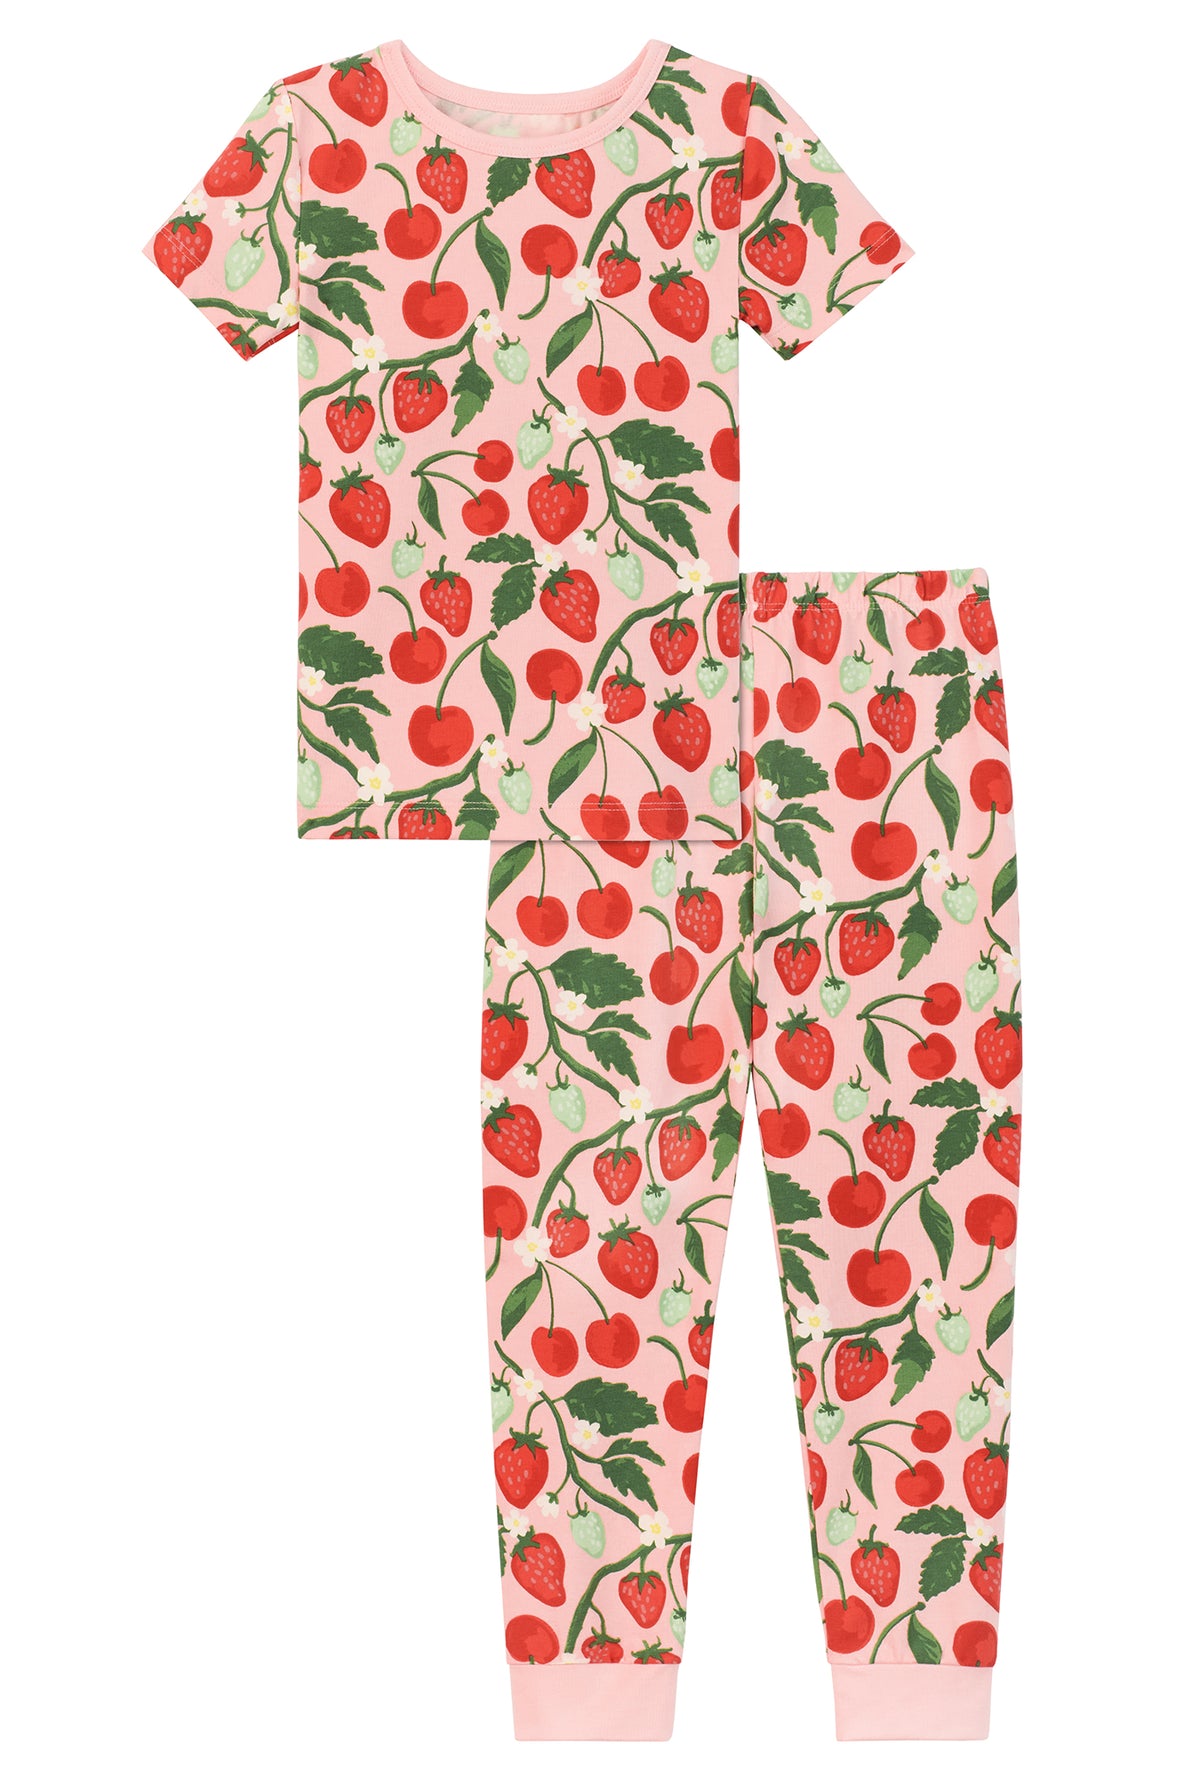 A girl wearing Short Sleeve Stretch Jersey Kids PJ Set with berry bliss print